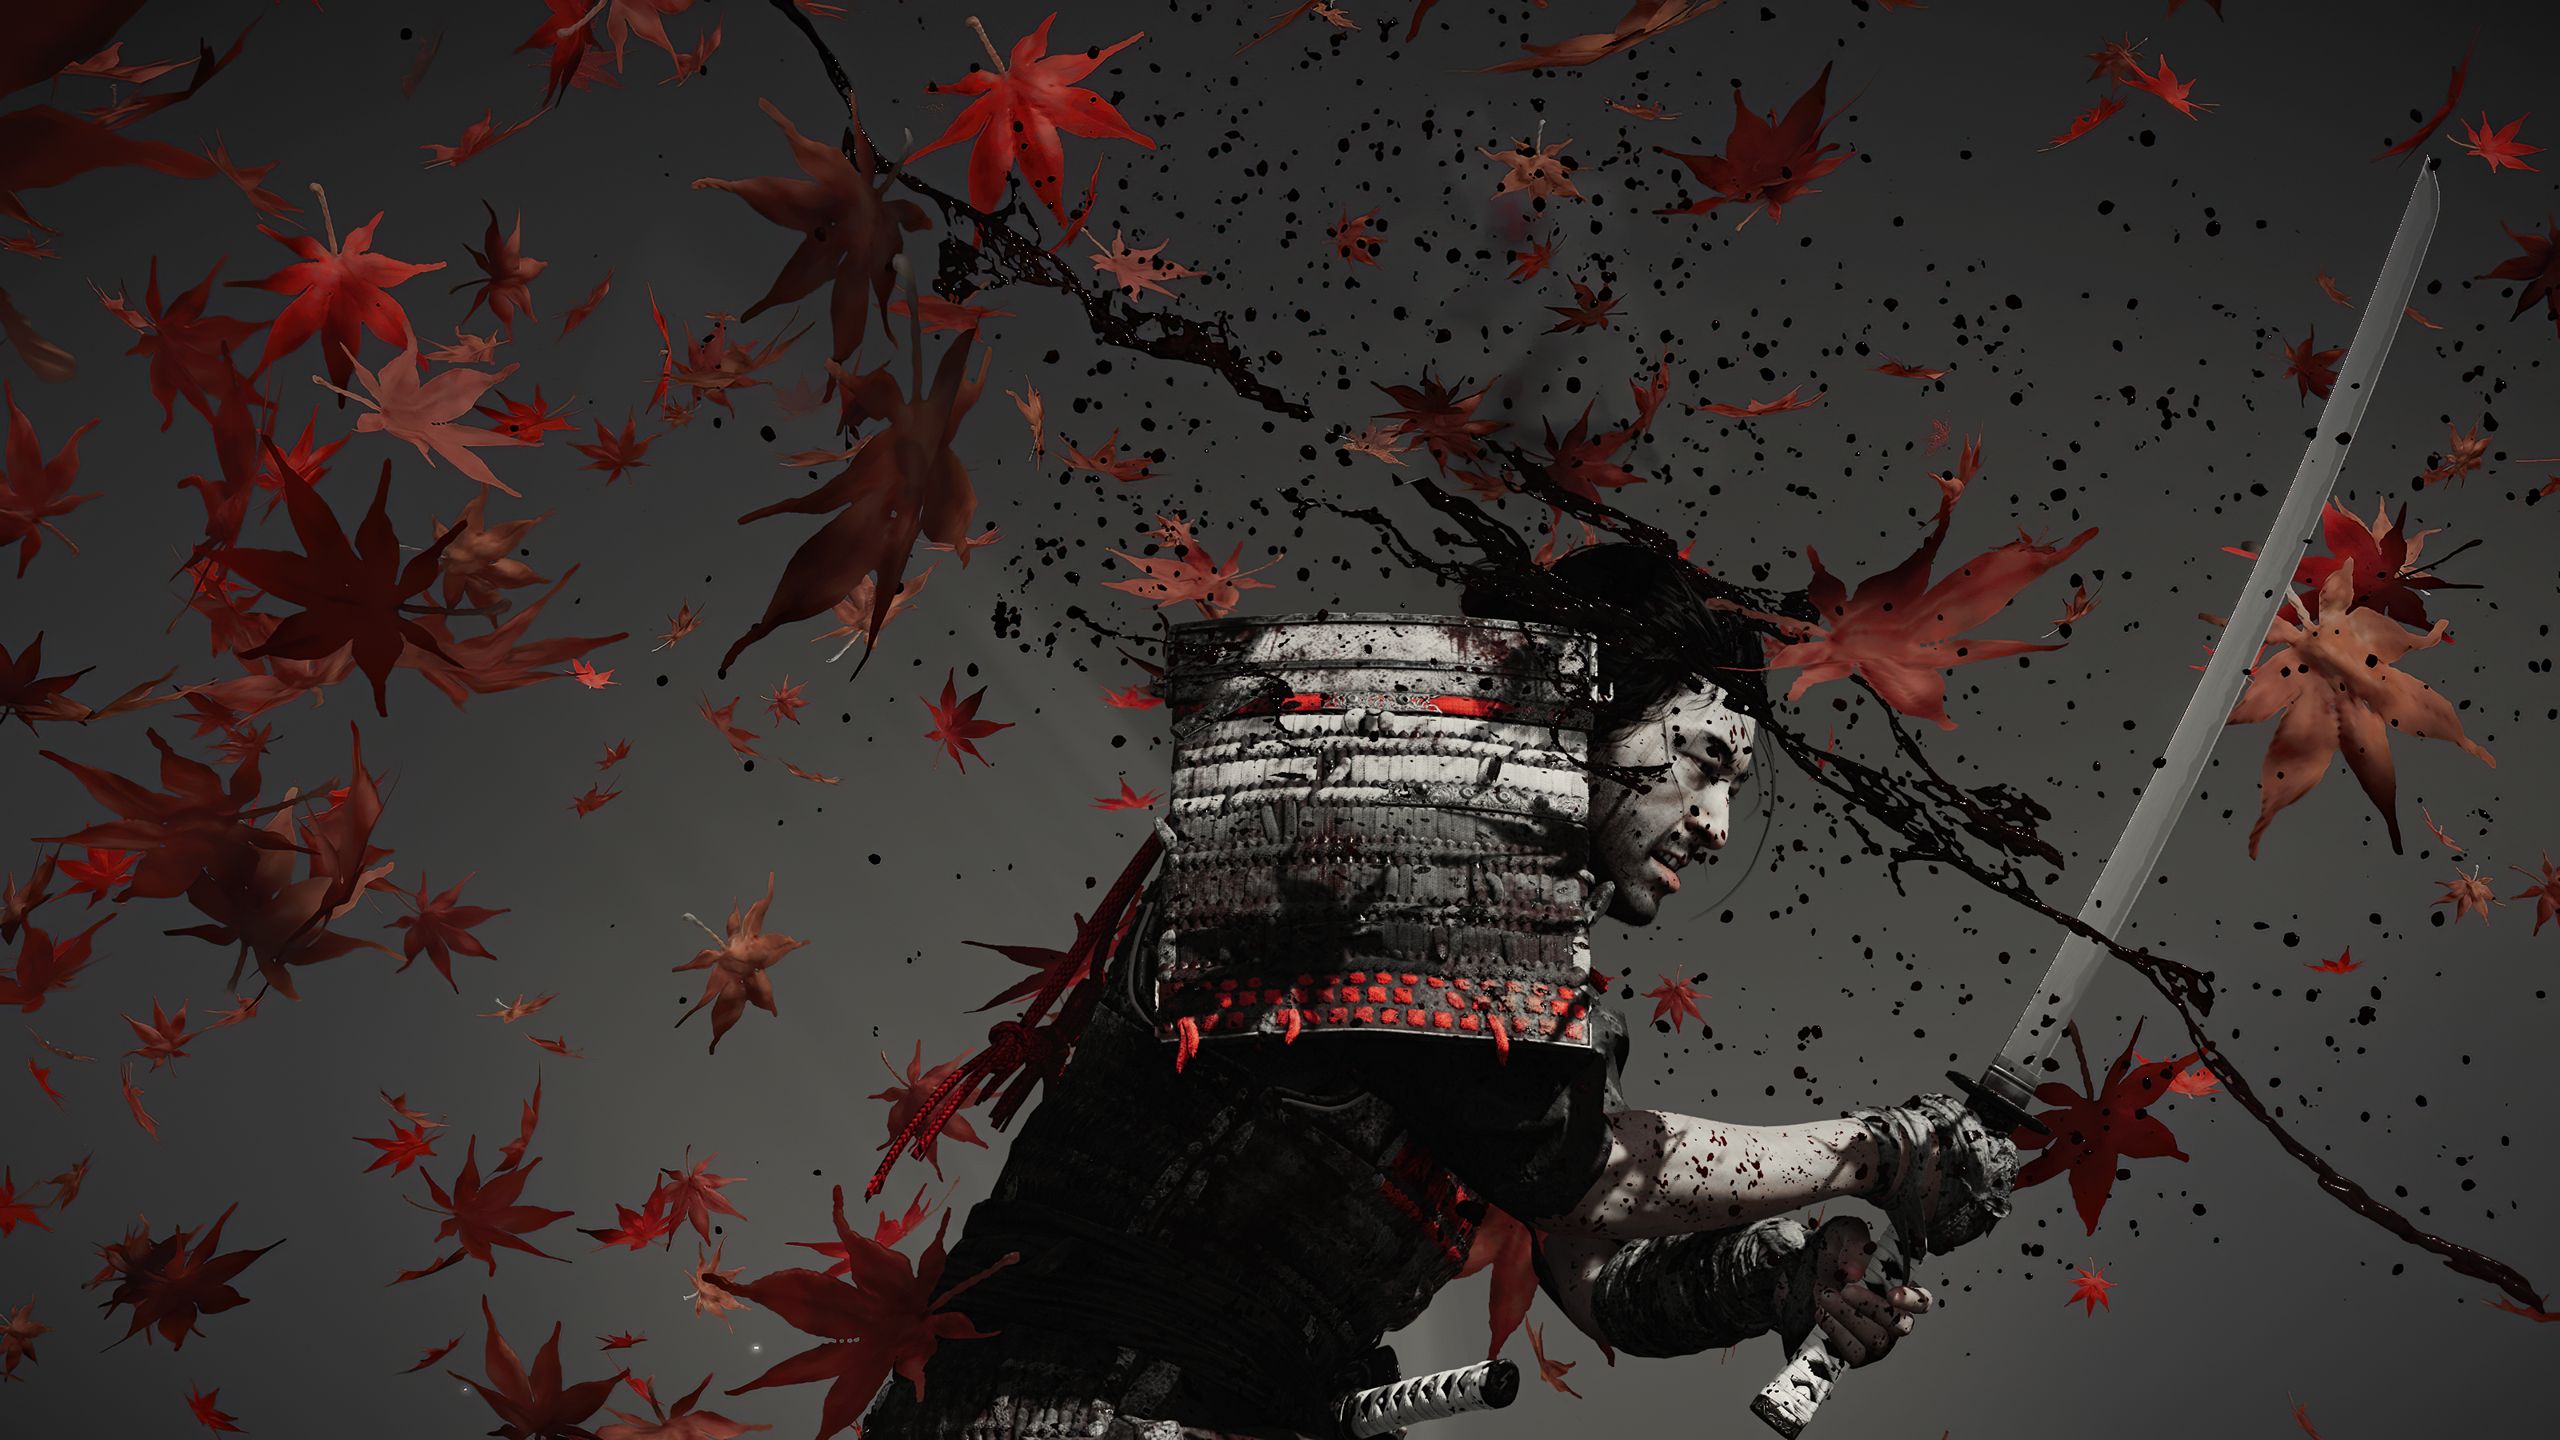 Ghost of Tsushima : Legends HD wallpaper  Ghost of tsushima, Ghost,  Japanese warrior